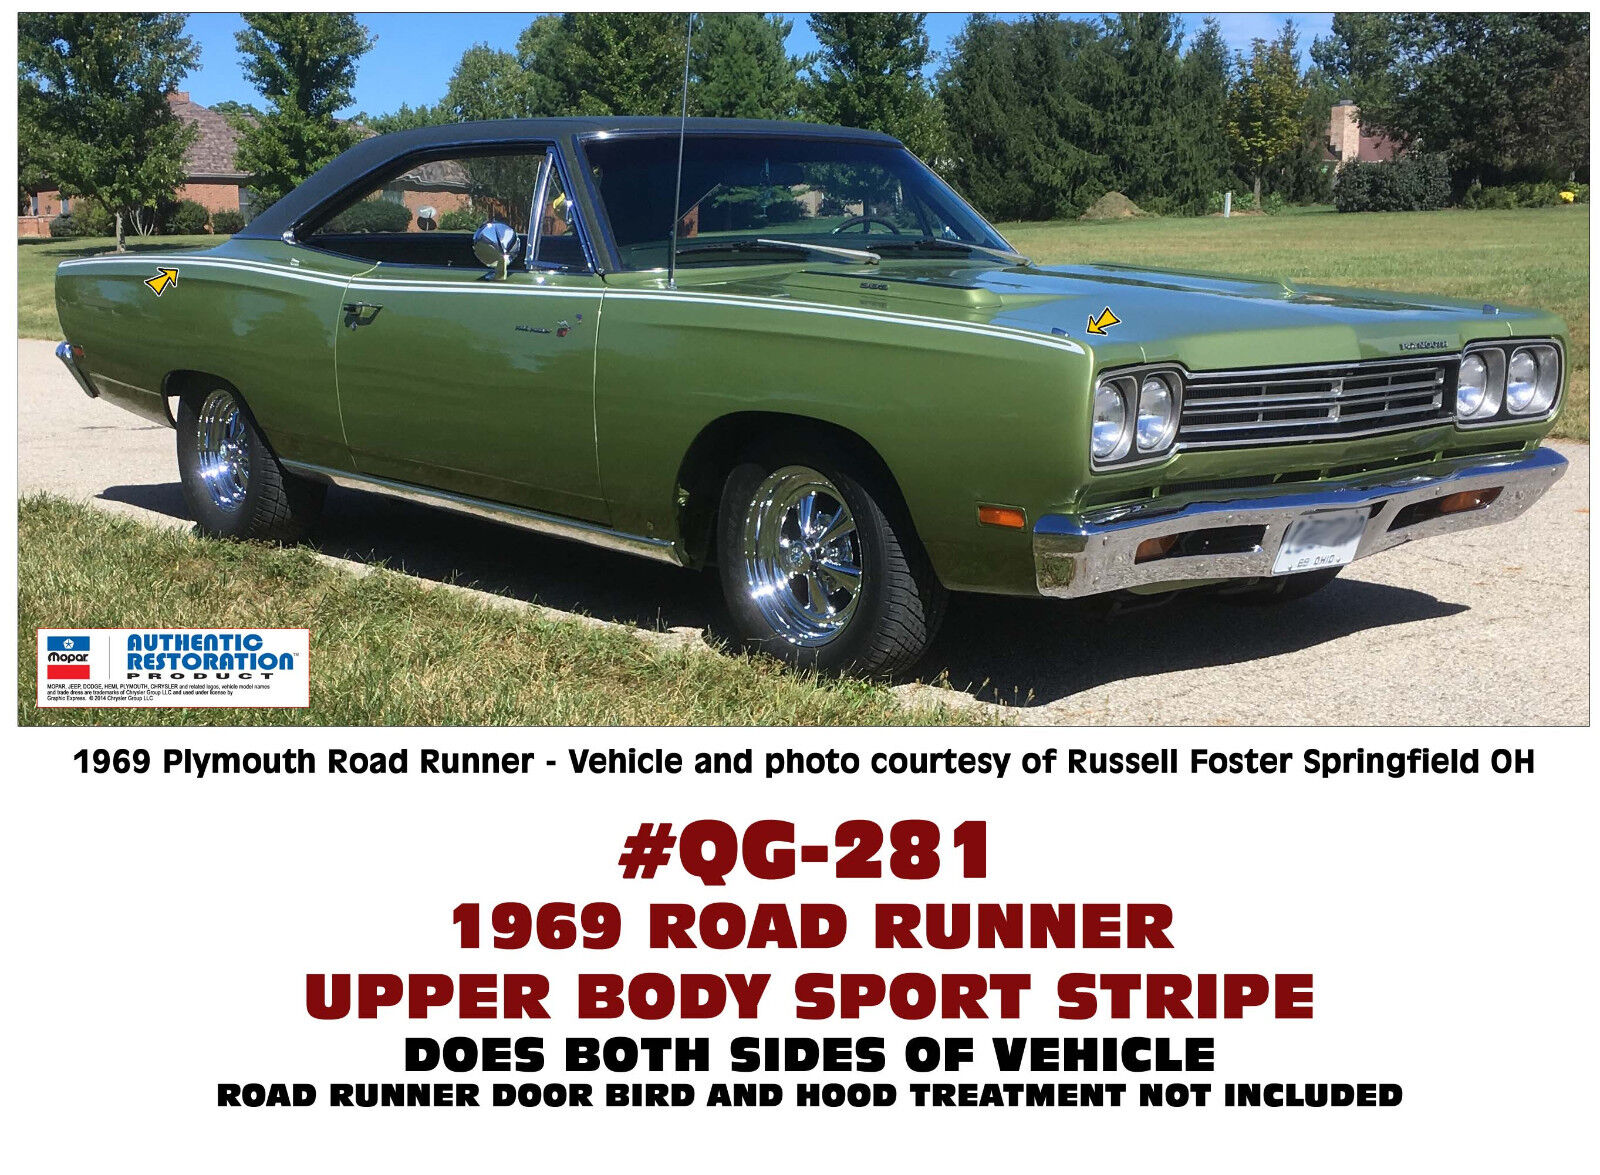 QG-281 1969 ROAD RUNNER - UPPER BODY WIDE SPORT STRIPES - DECAL - REFLECTIVE